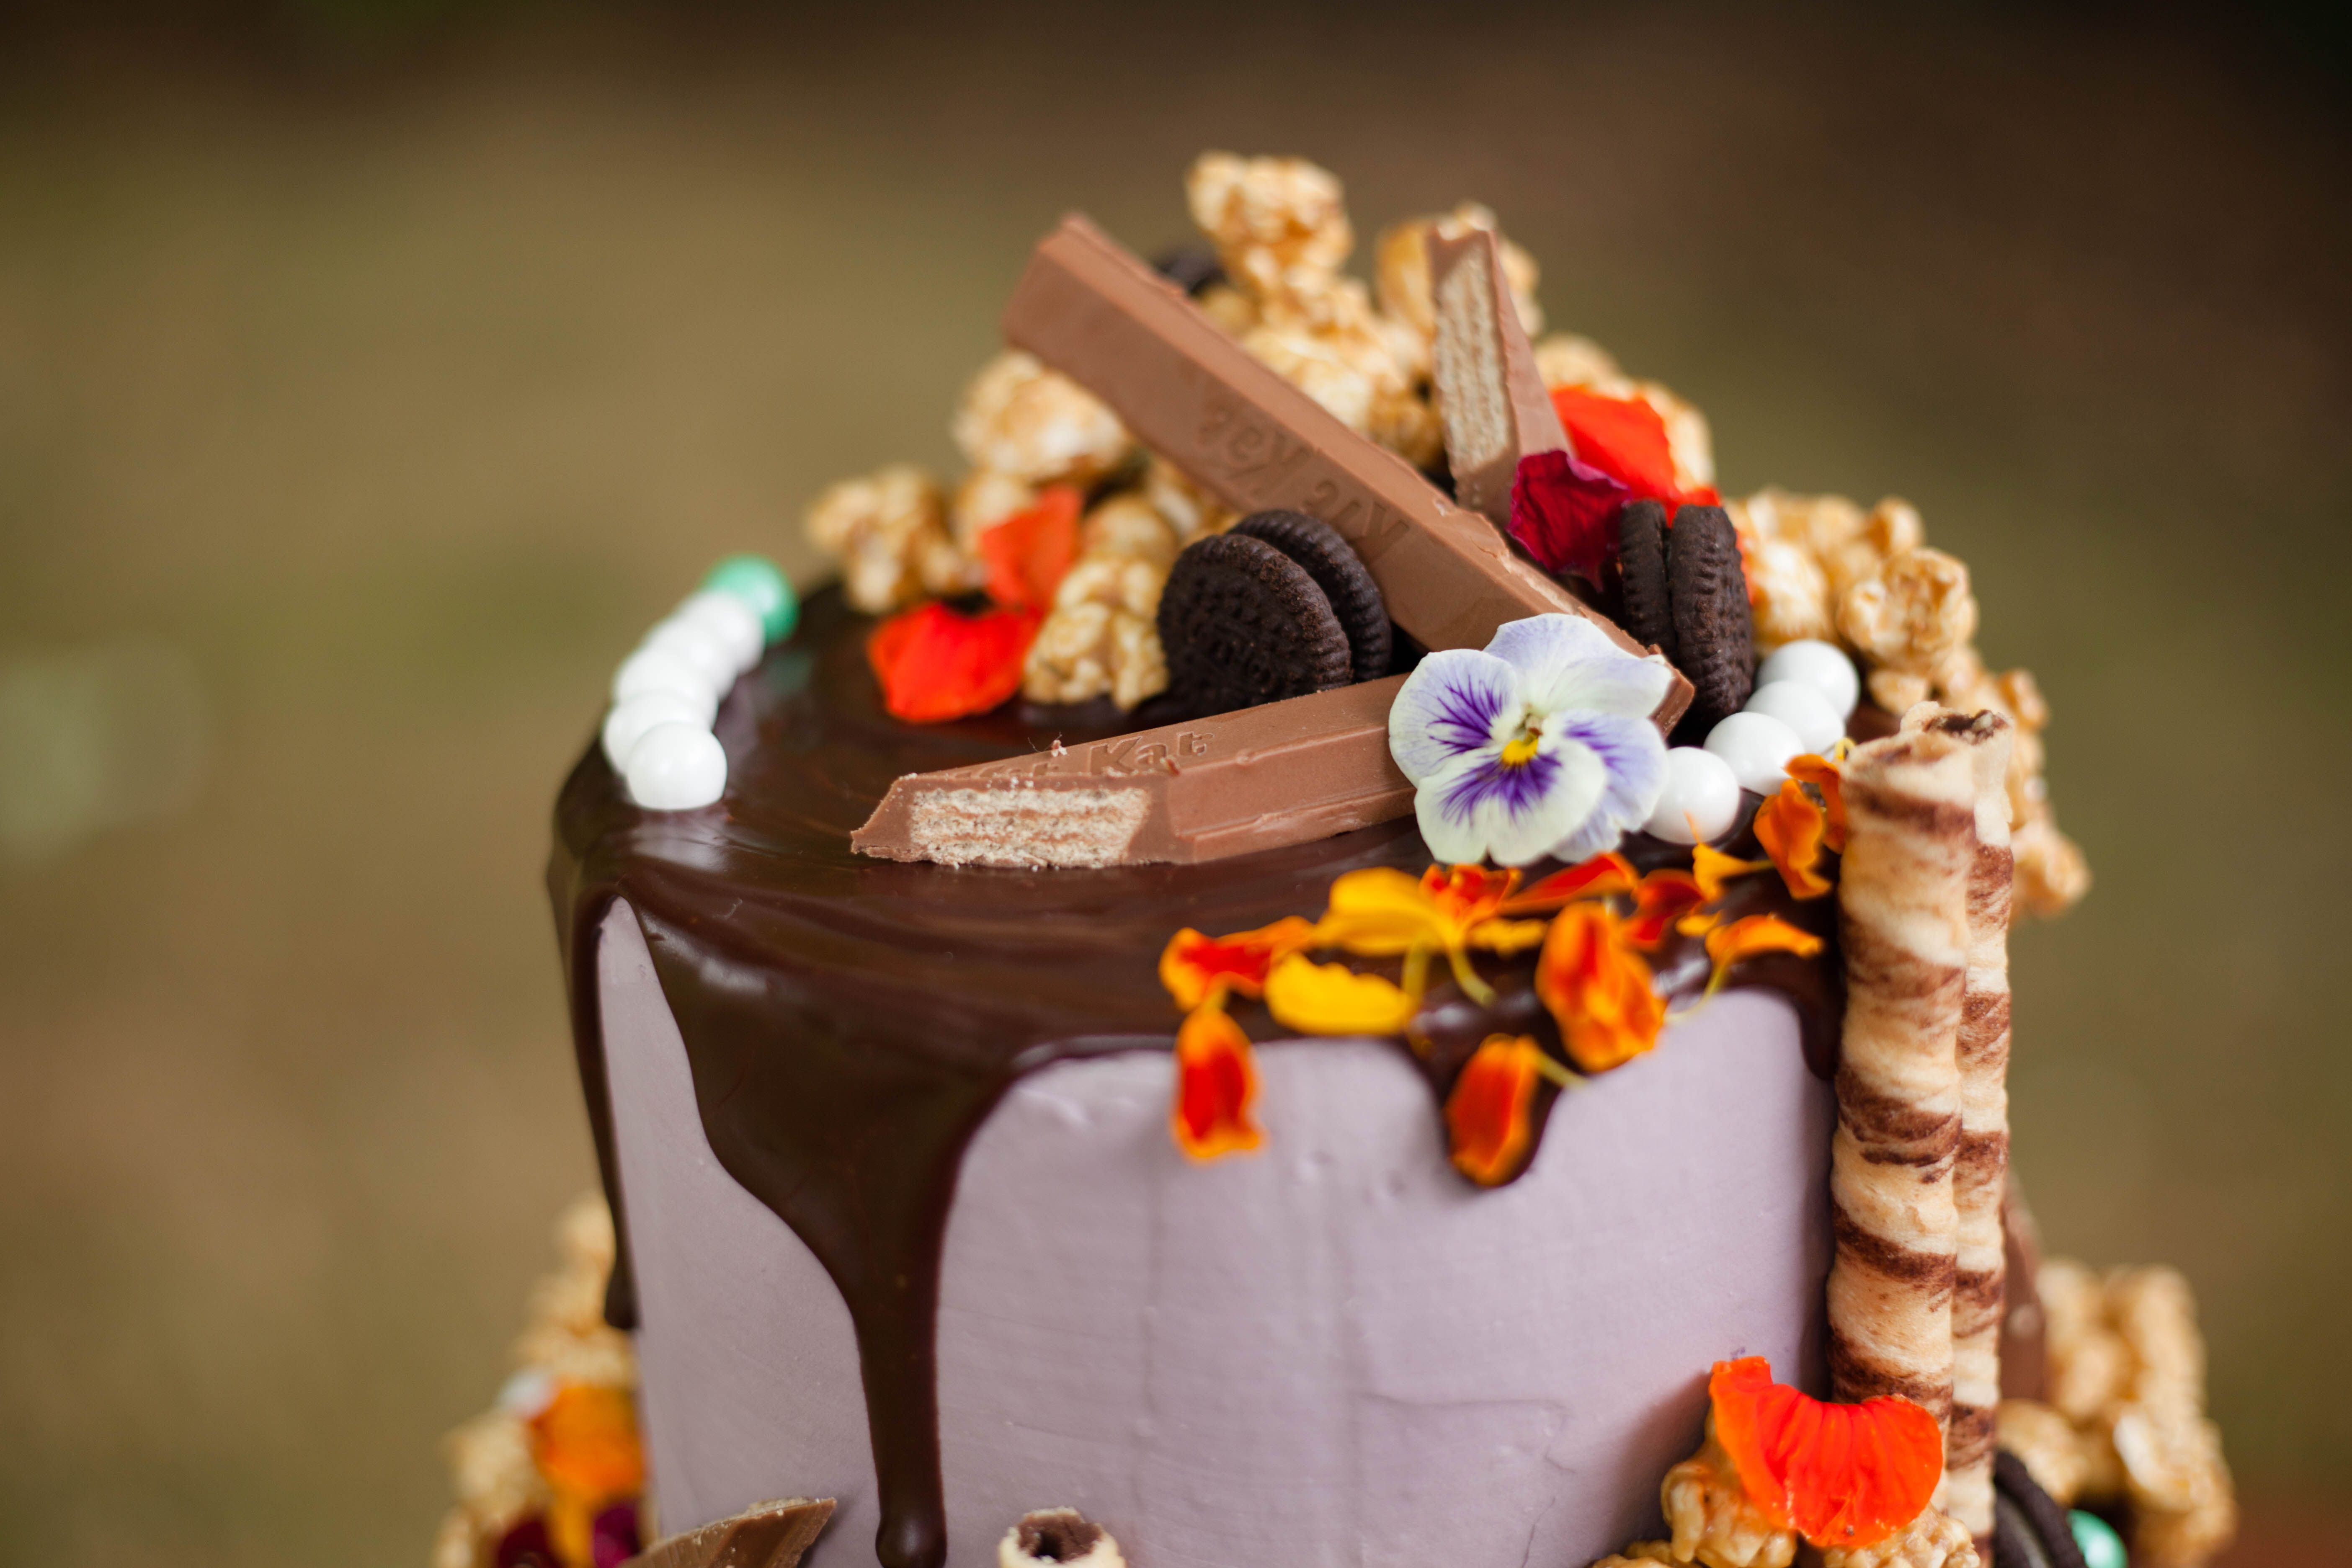 delectable | baked goods- Cakes and macaron's for your party and ...